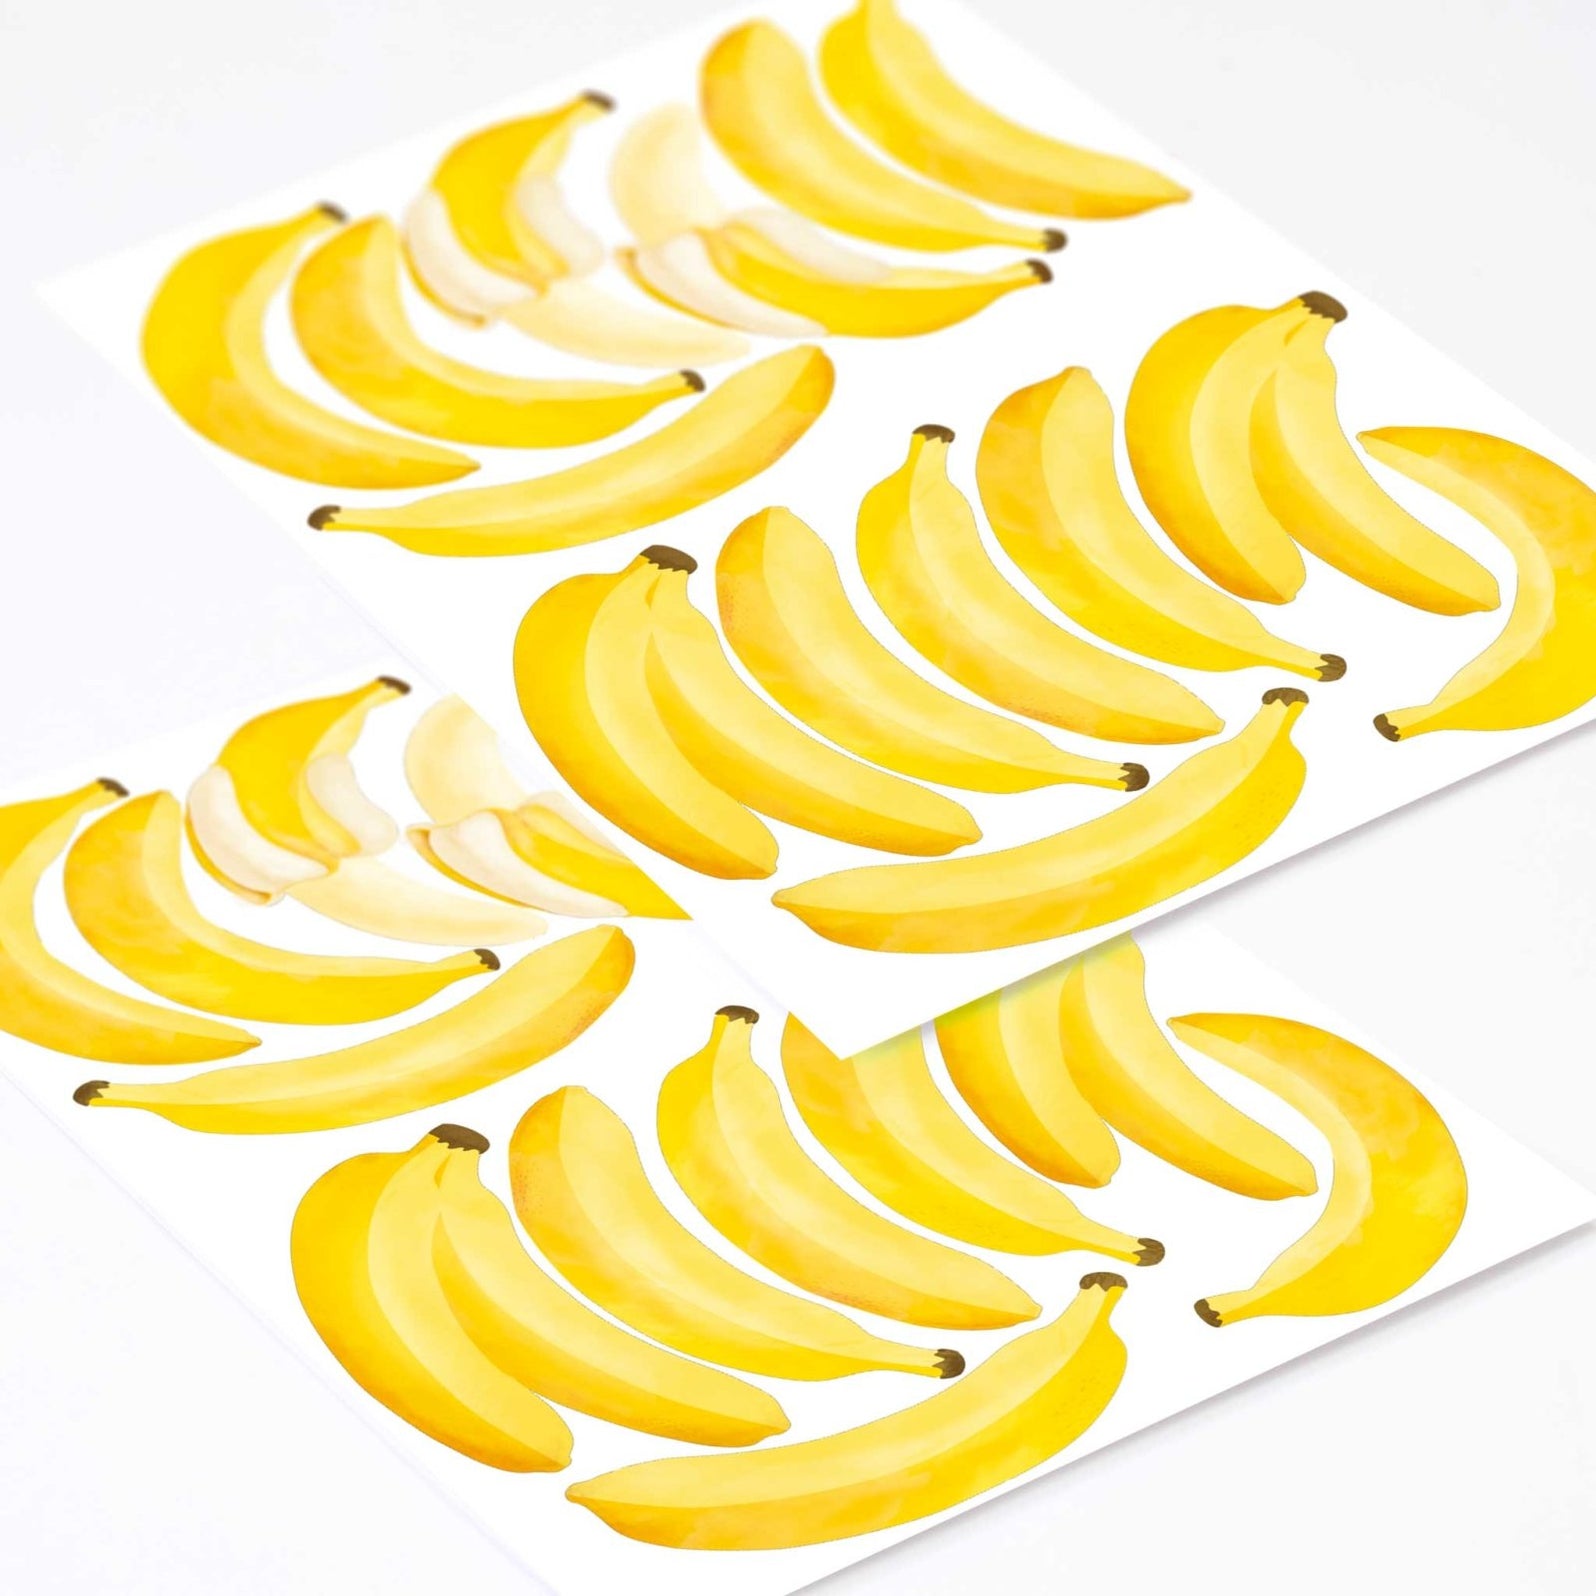 Beautiful bananas wall decals for happy homes - Made of Sundays